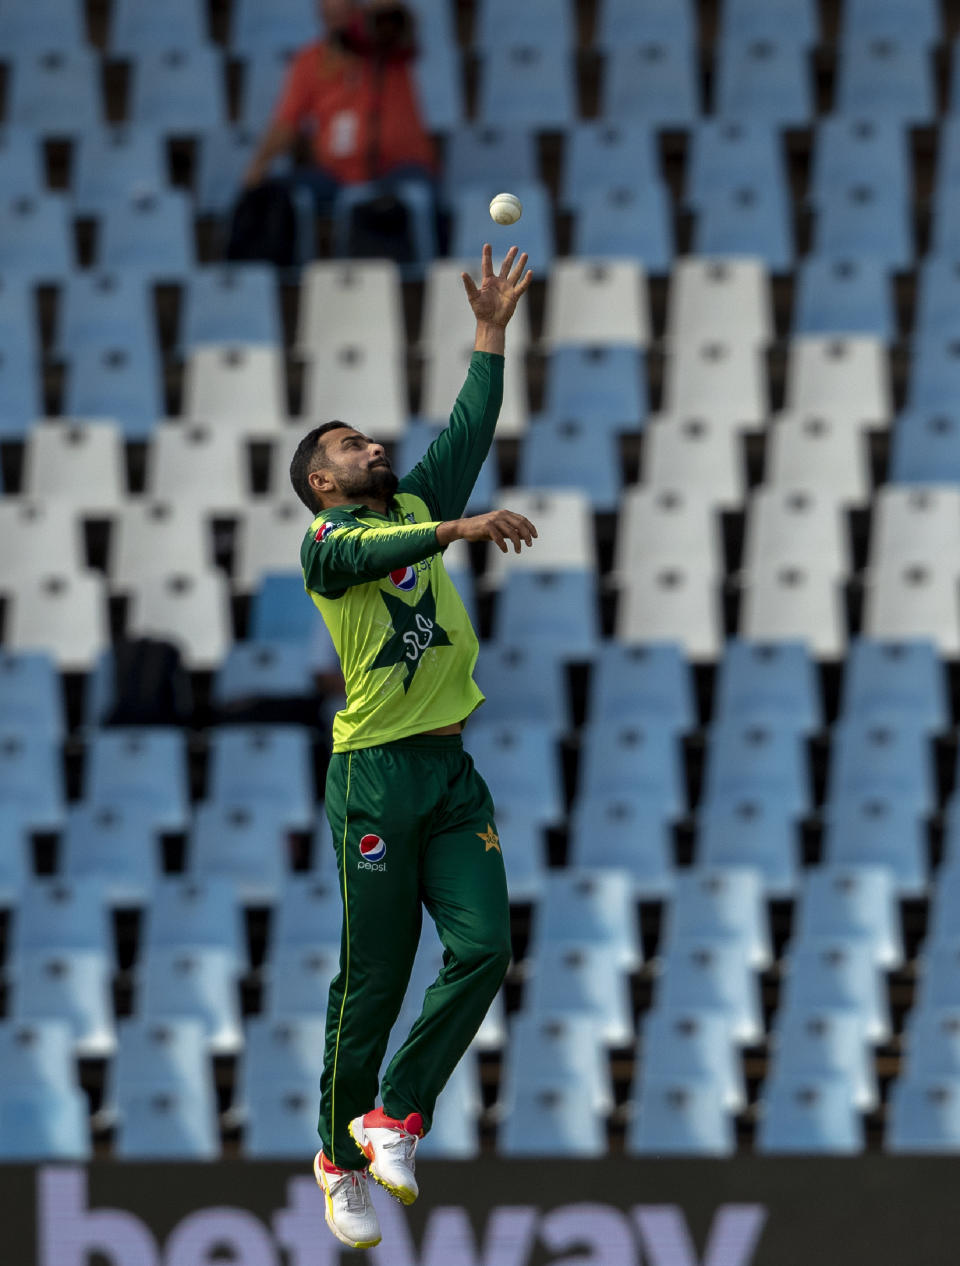 Pakistan's bowler Muhammad Nawaz jumps for the ball during the fourth and final T20 cricket match between South Africa and Pakistan at Centurion Park in Pretoria, South Africa, Friday, April 16, 2021. (AP Photo/Themba Hadebe)